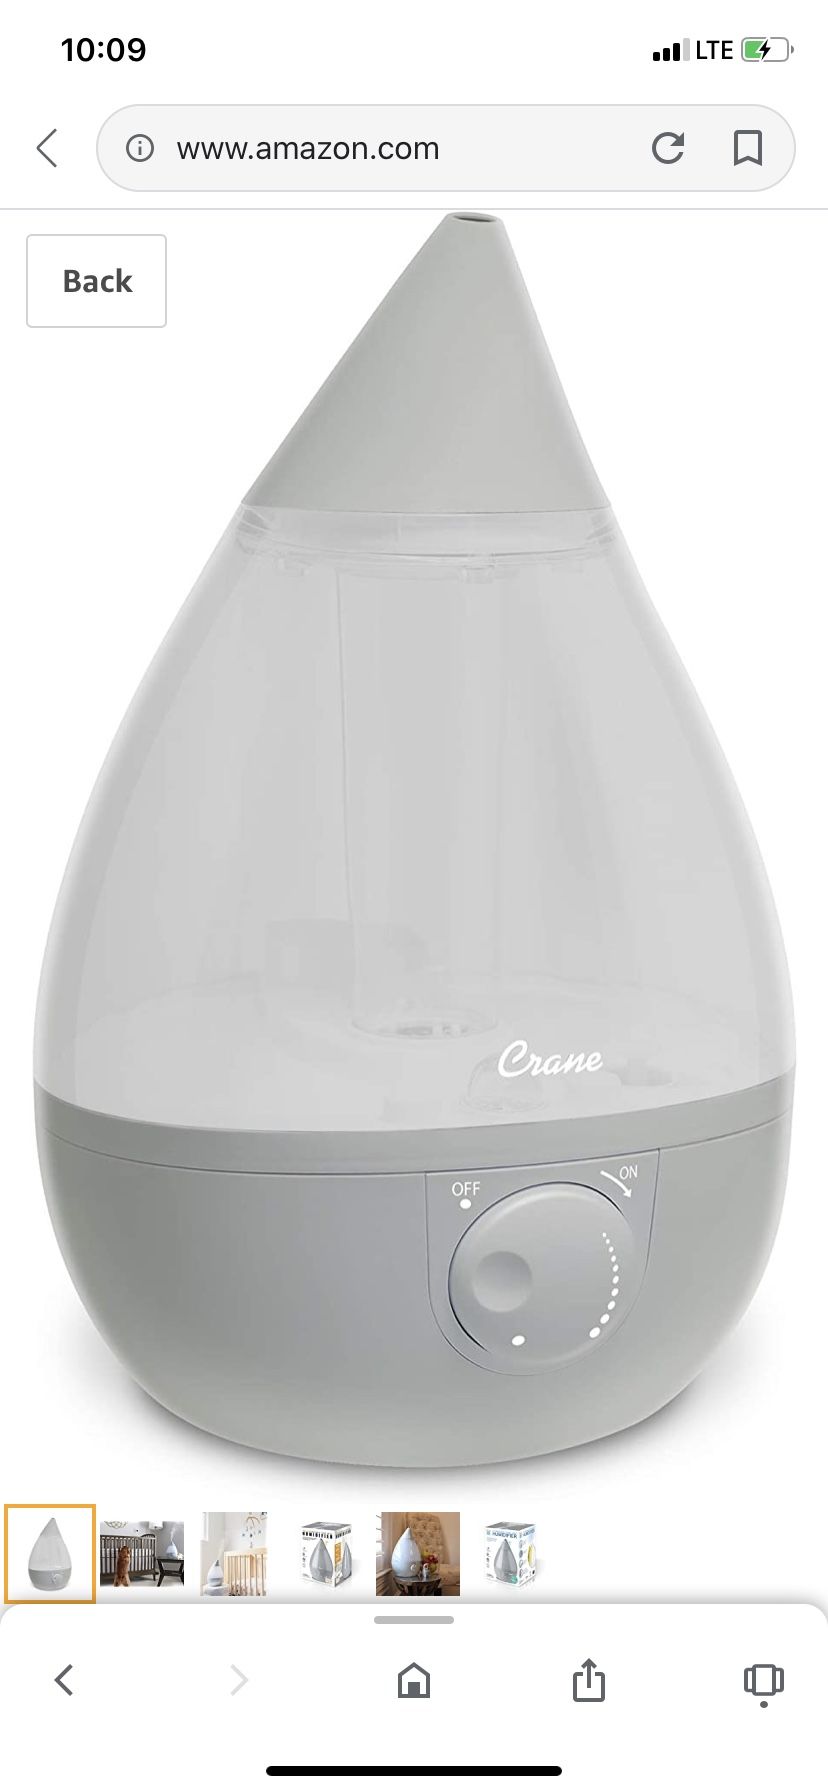 Crane Drop Ultrasonic Cool Mist Humidifier, Filter Free, 1 Gallon, 24 Hour Run Time, Whisper Quiet, for Home Bedroom Baby Nursery and Office, Grey